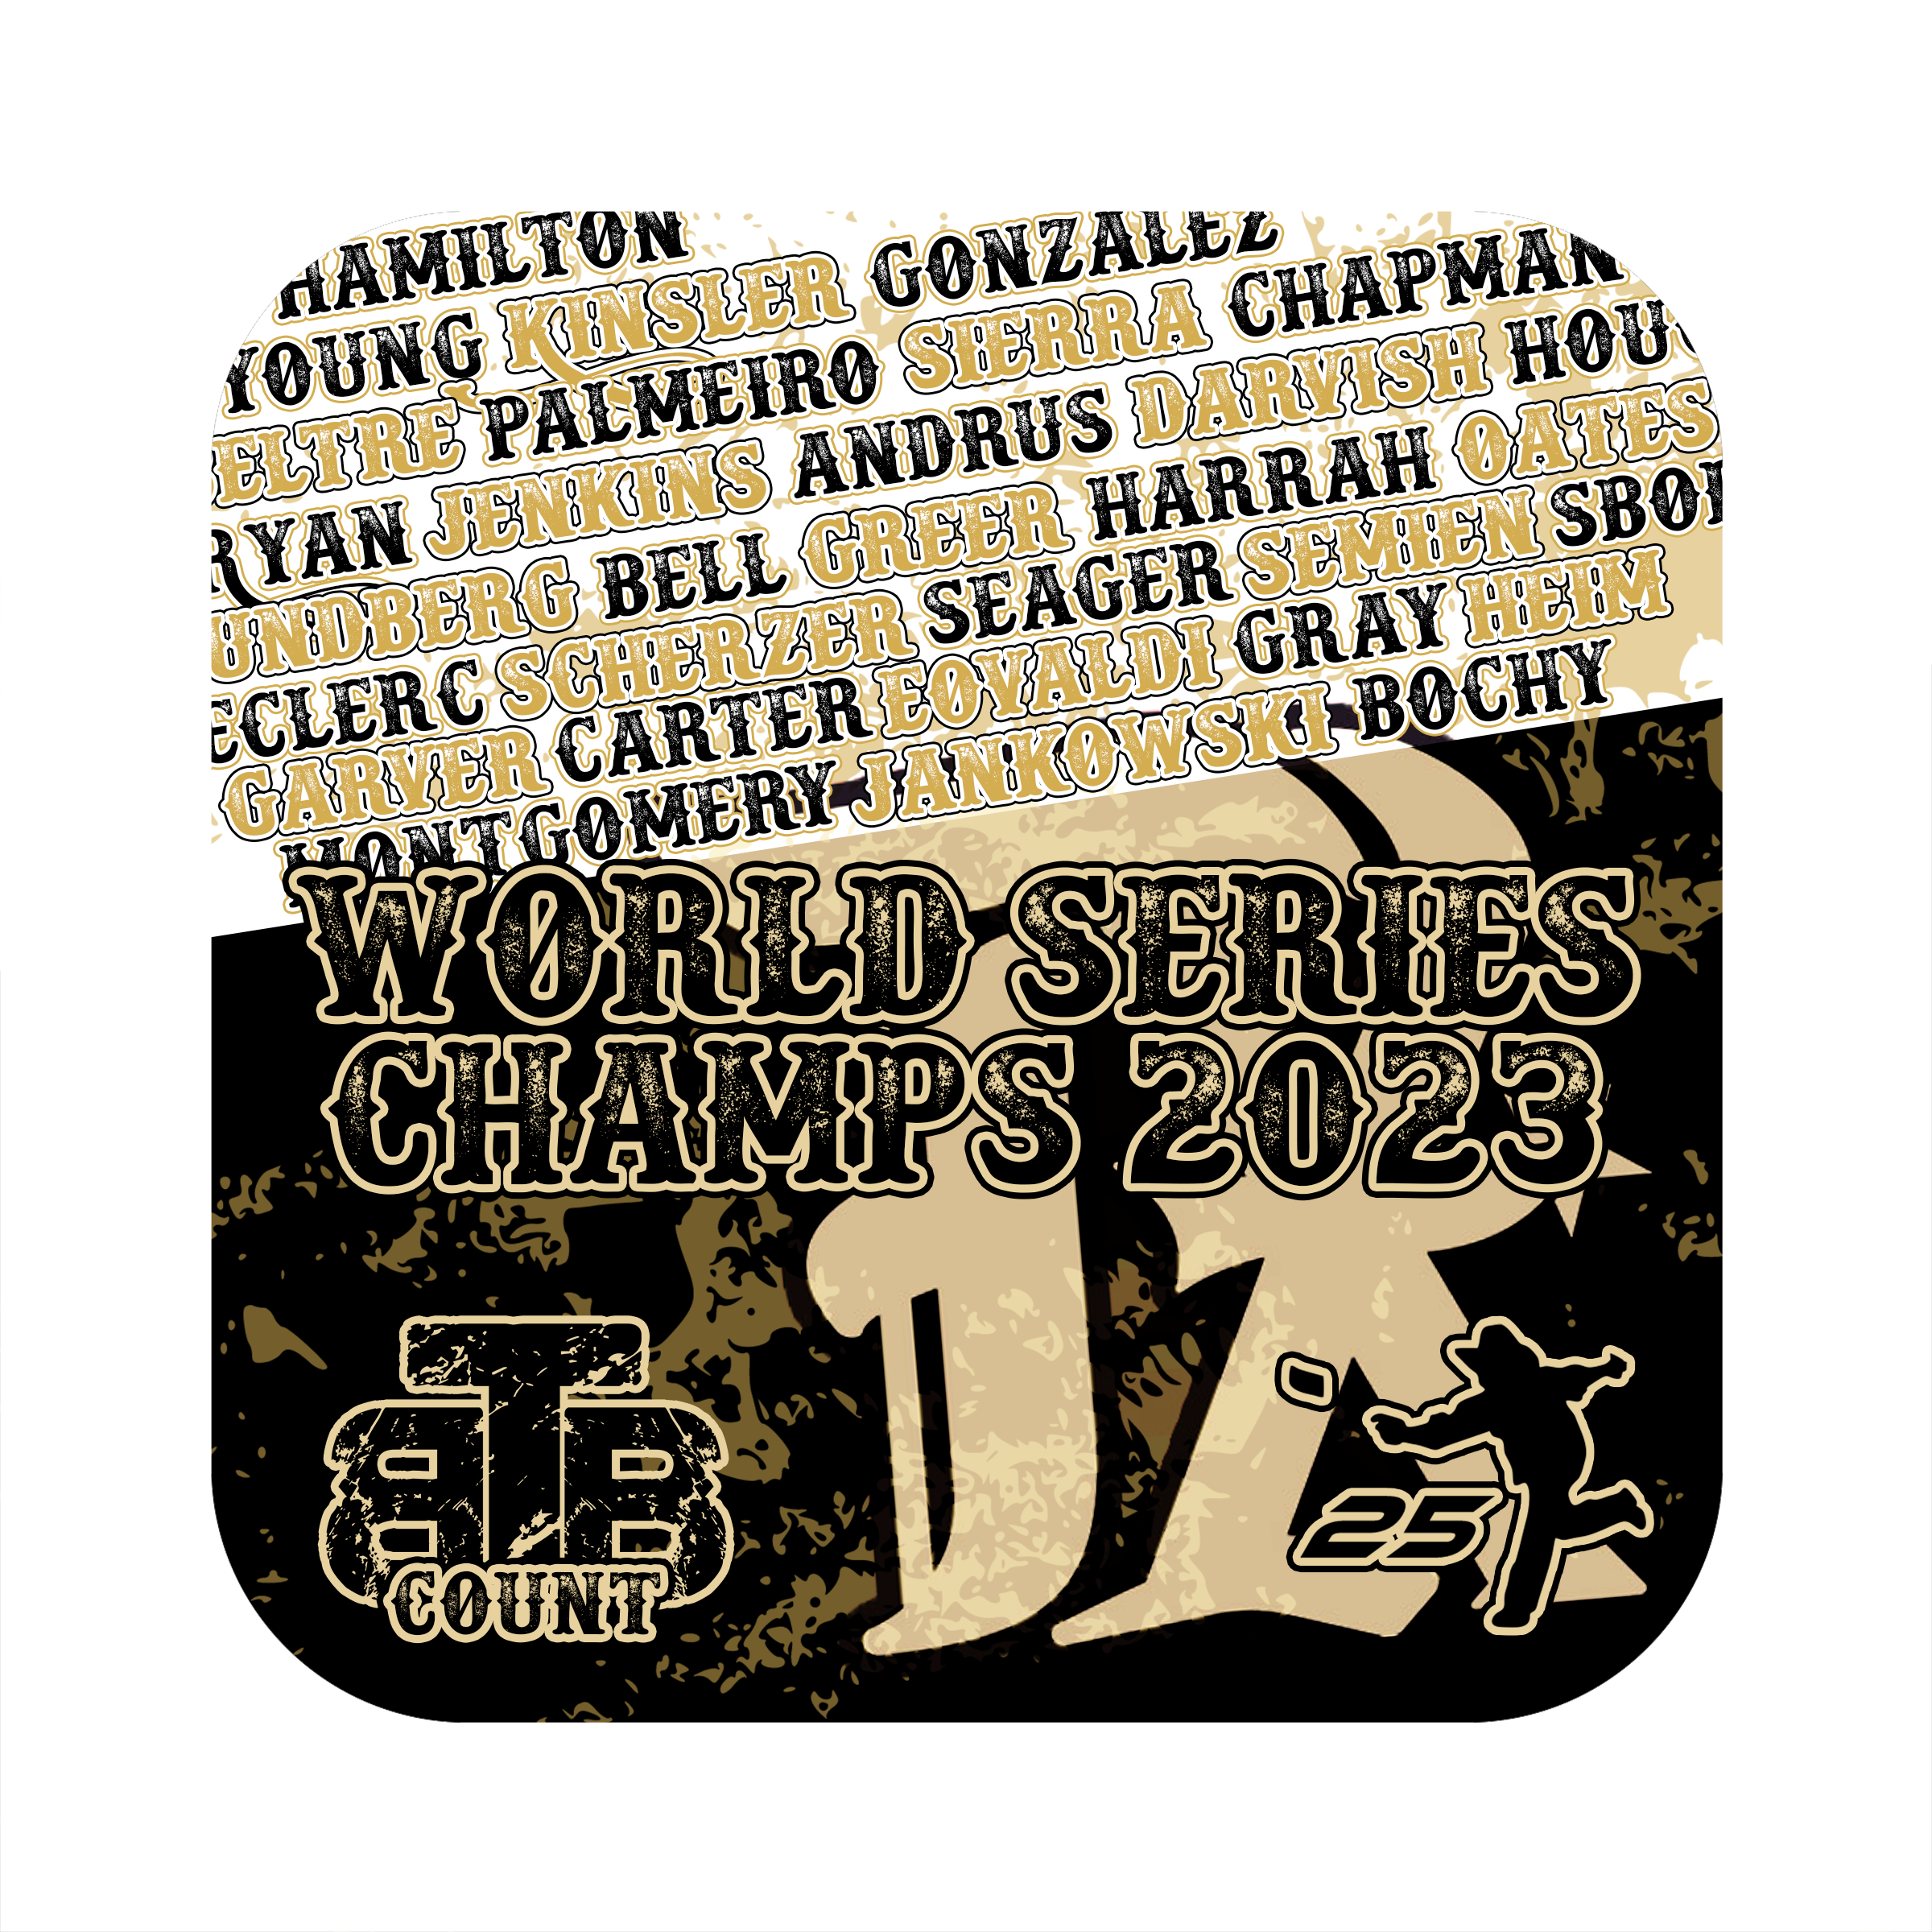 Rangers World Series Champs Limited Edition